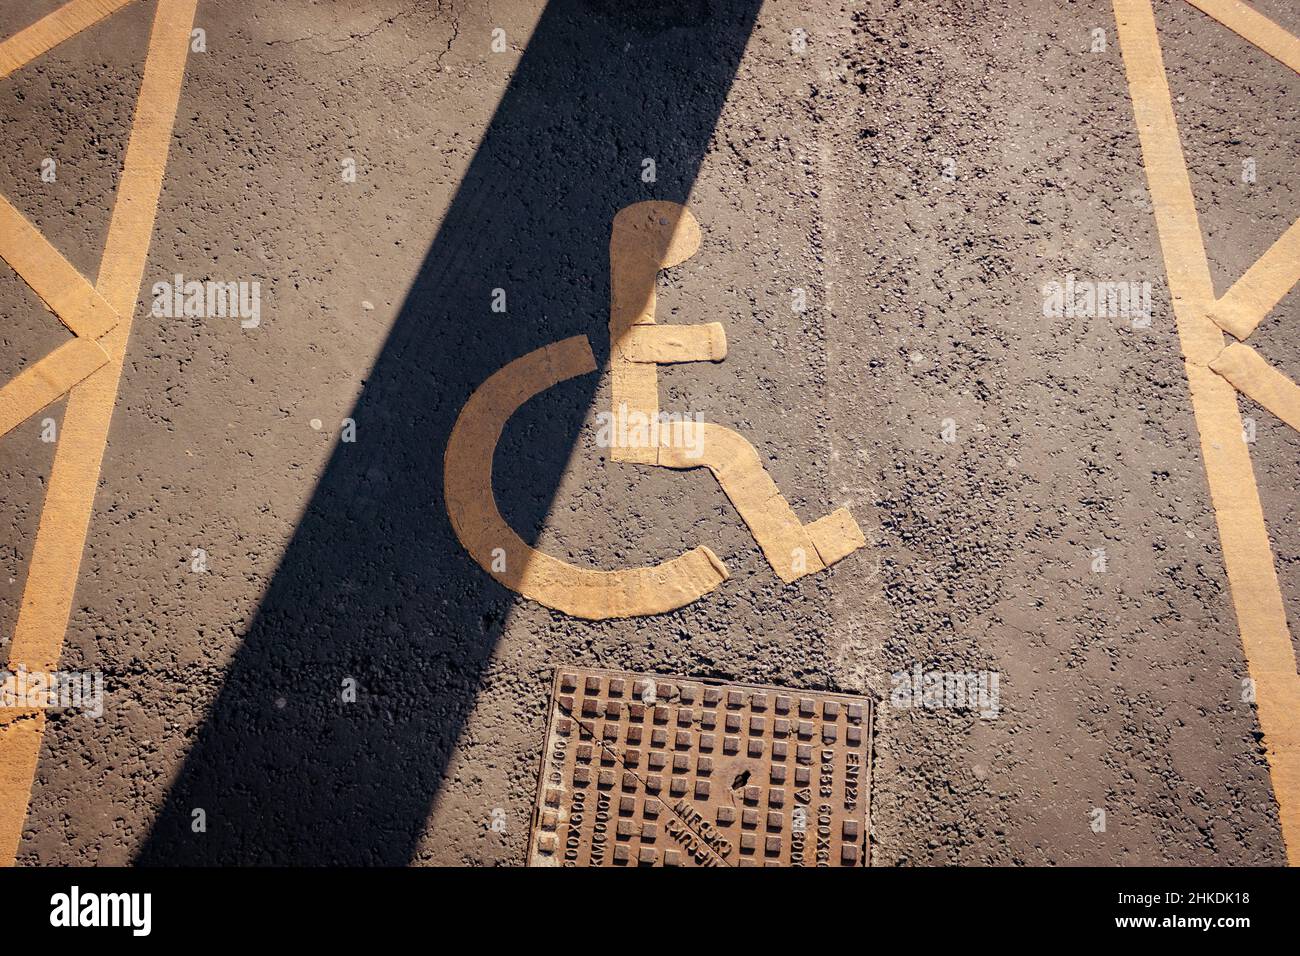 Disabled parking. Accessible parking spot. Blue badge. Yellow wheelchair sign on the ground Stock Photo